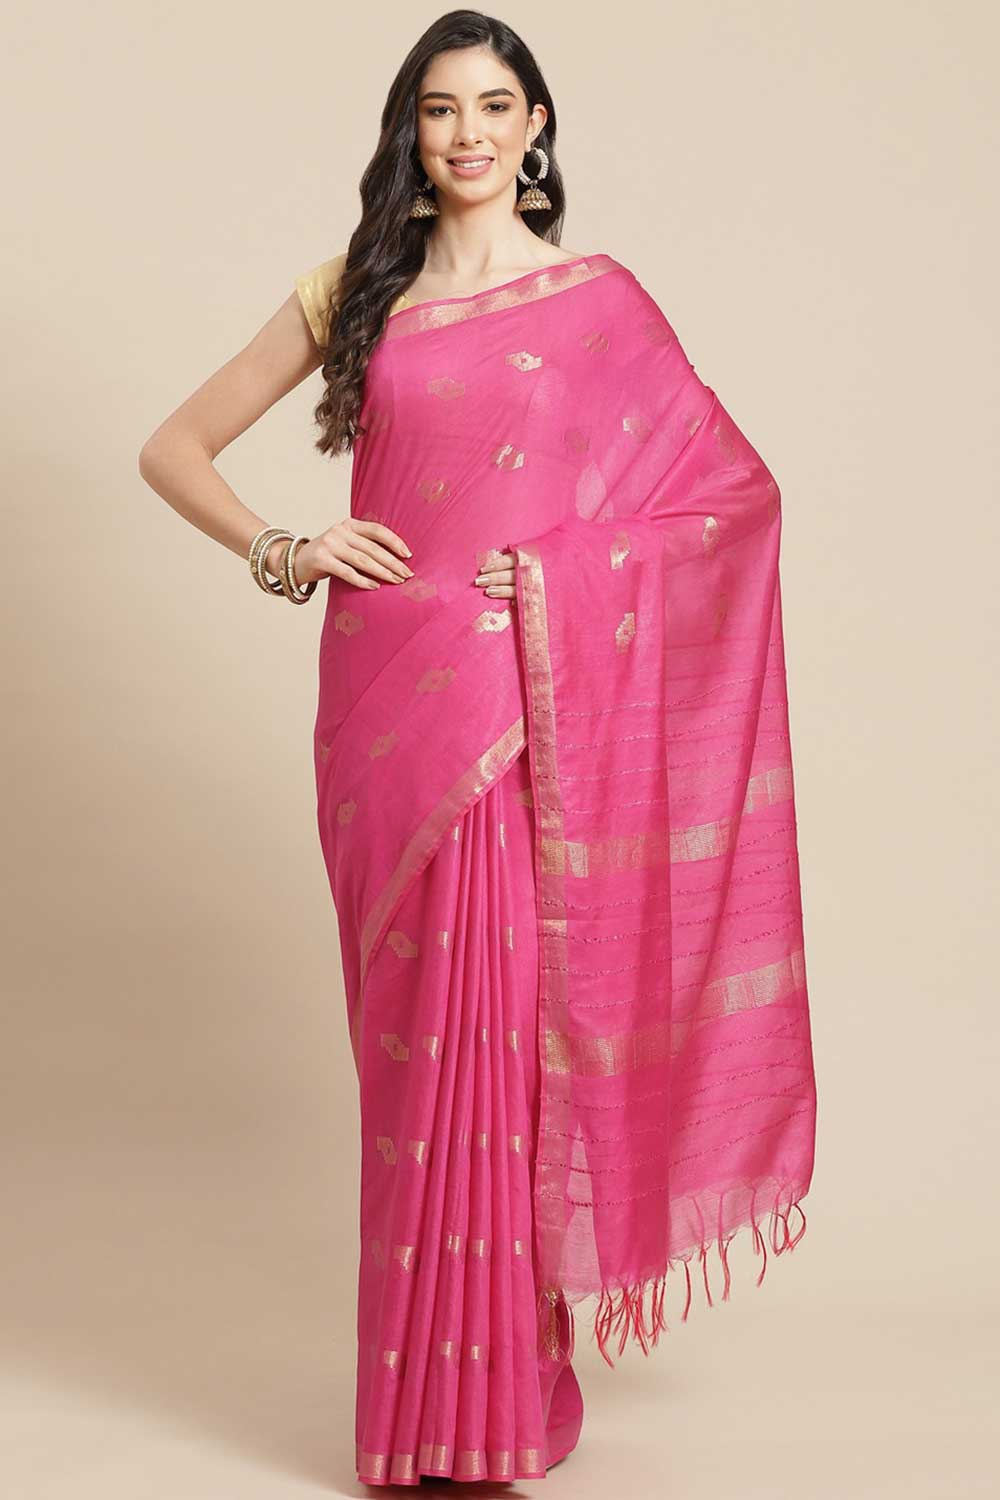 Buy Pink Zari Woven Blended Silk One Minute Saree Online